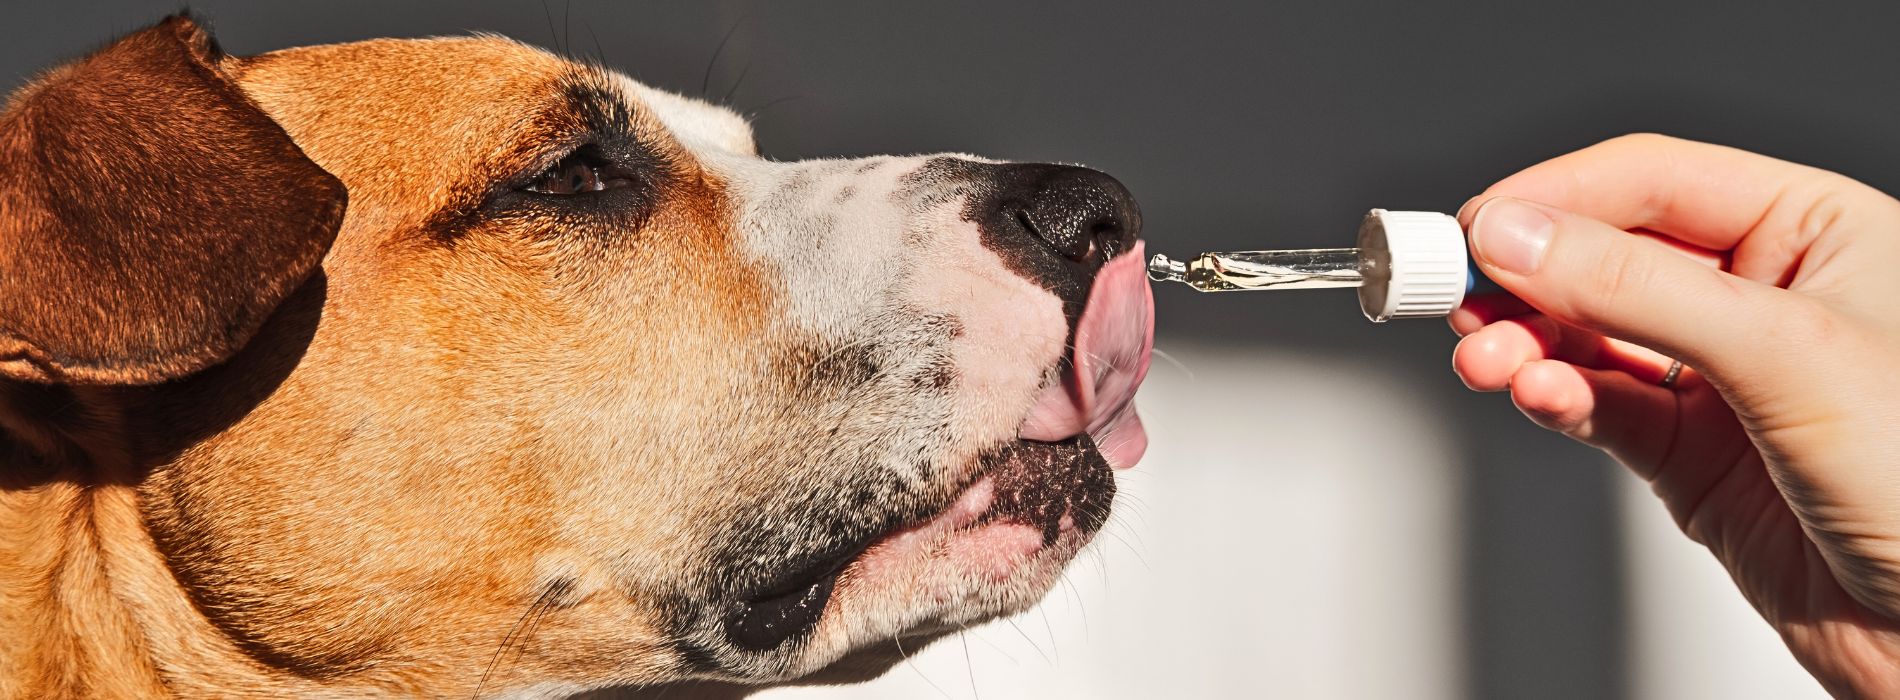 Are Essential Oils Safe for dogs?